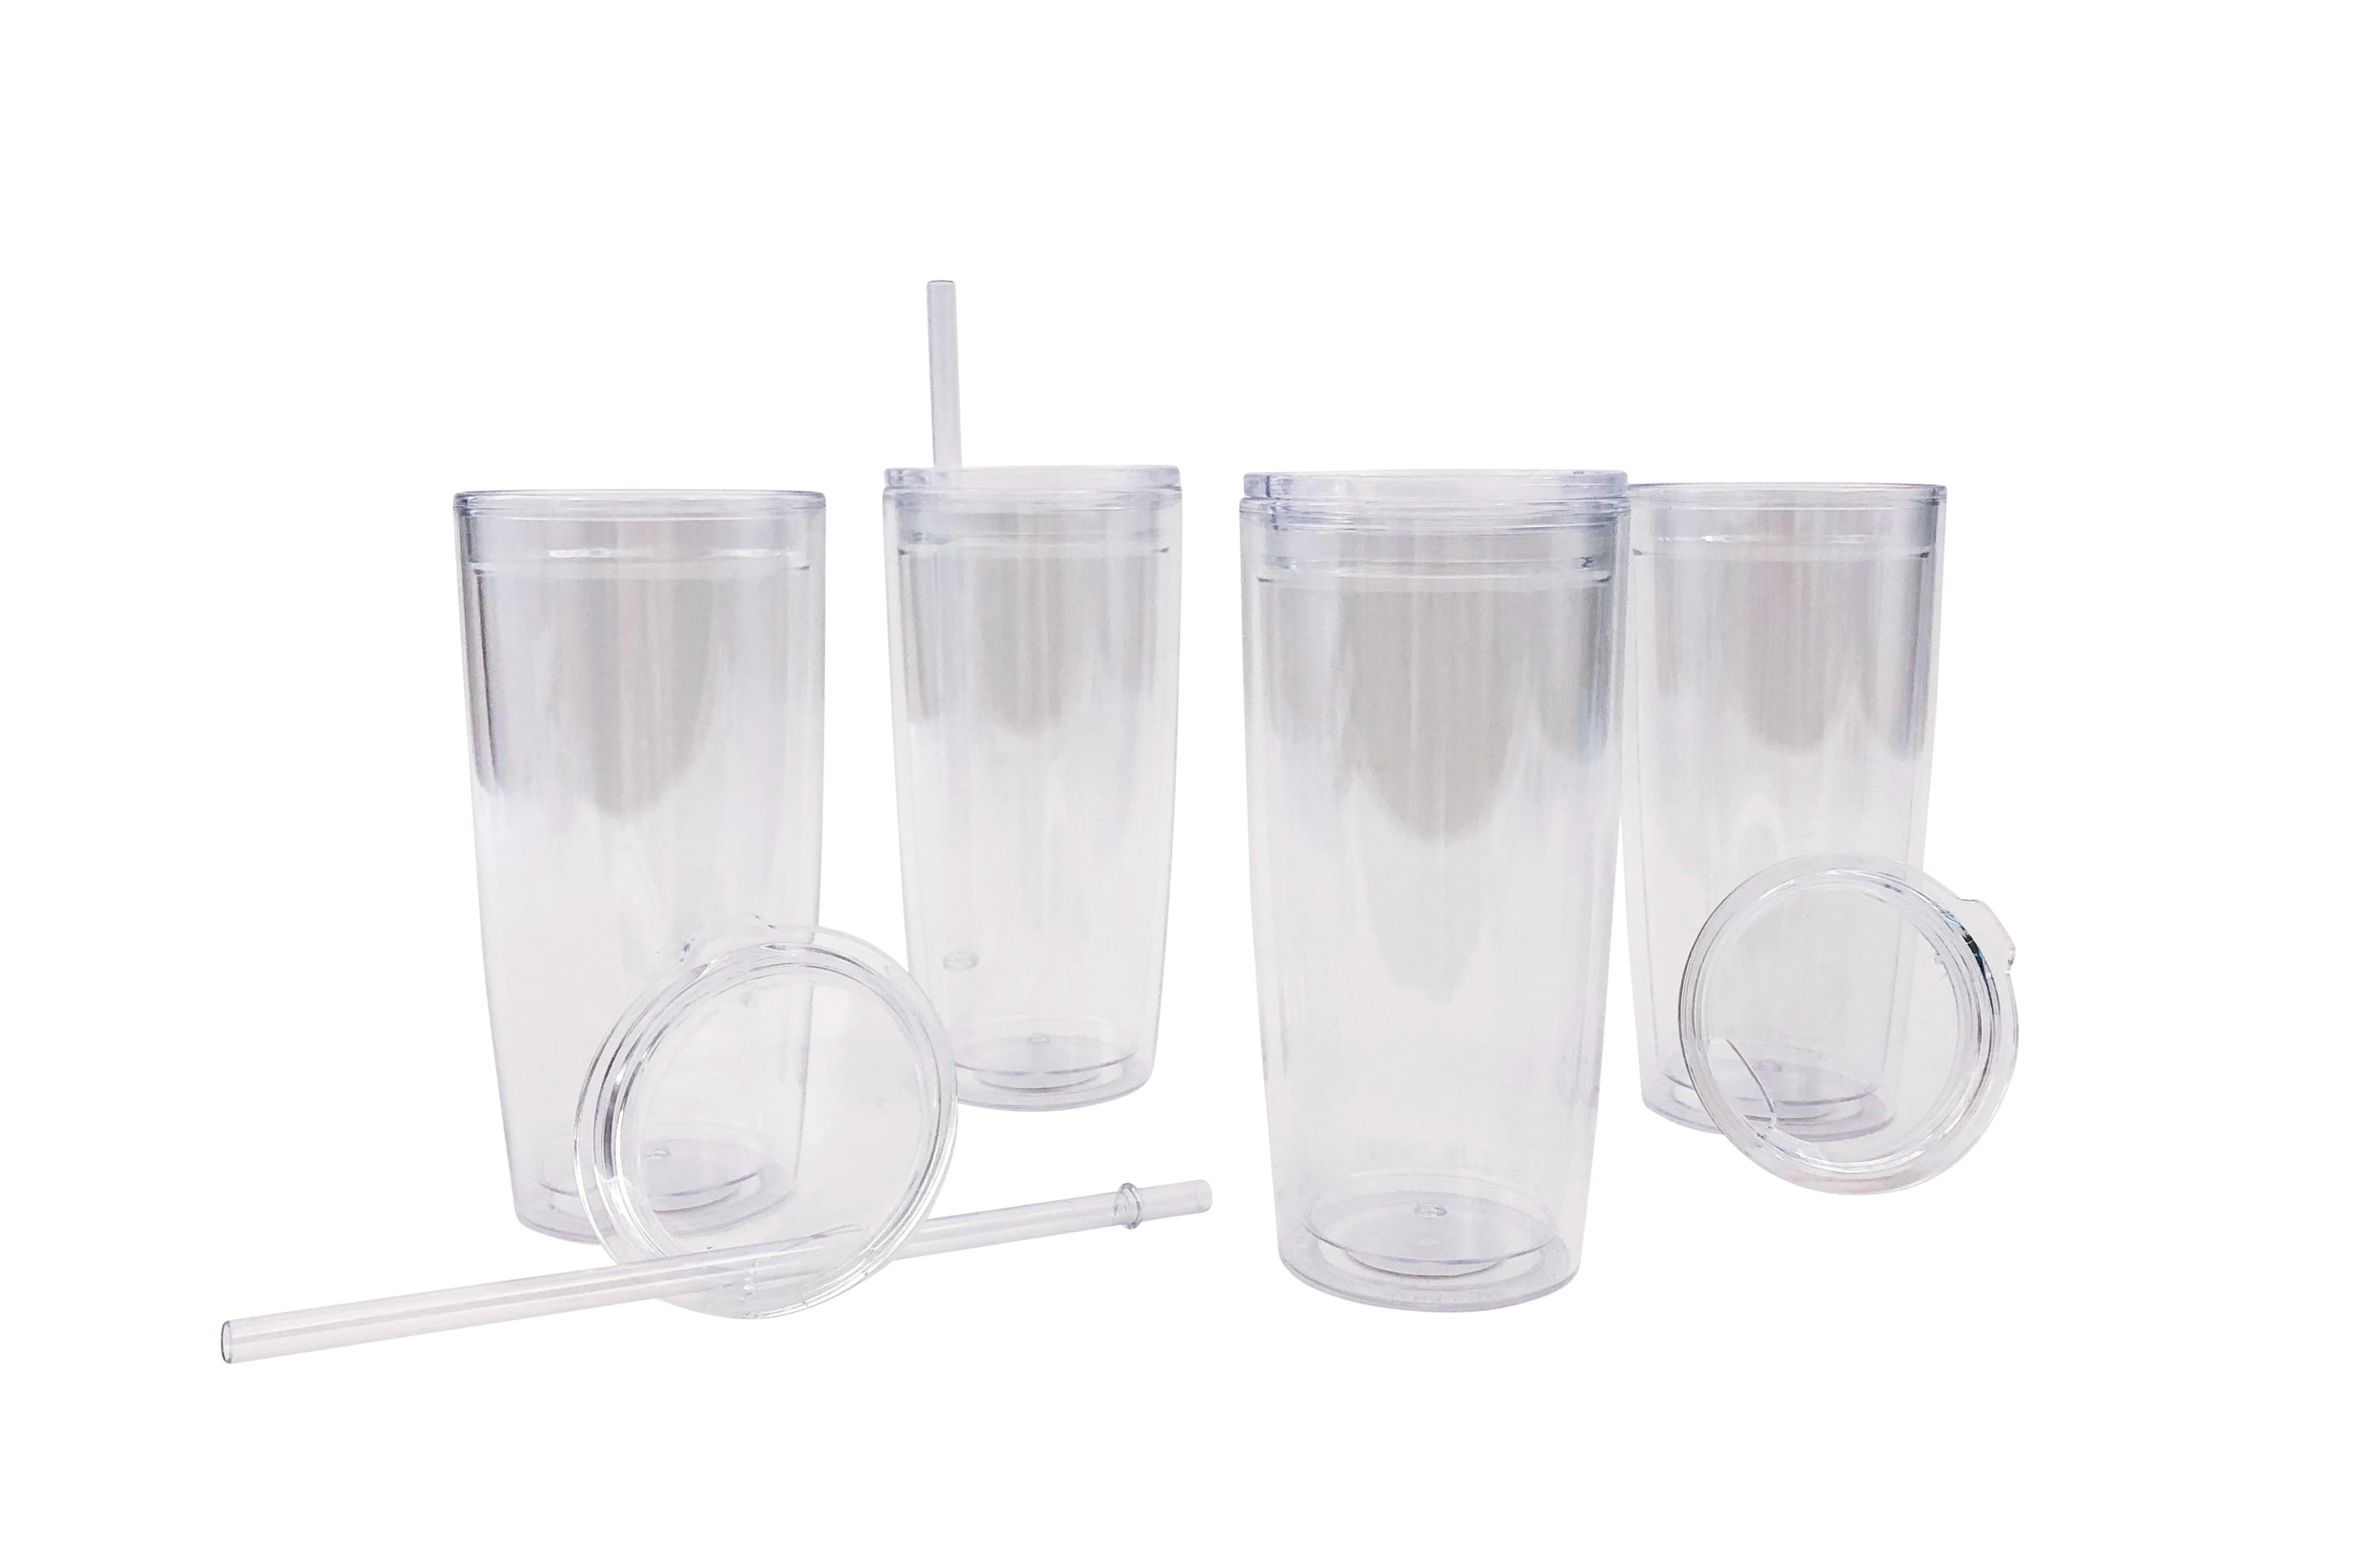 Dancer Insulated Tumbler w/Straw – The Dance Wearhouse